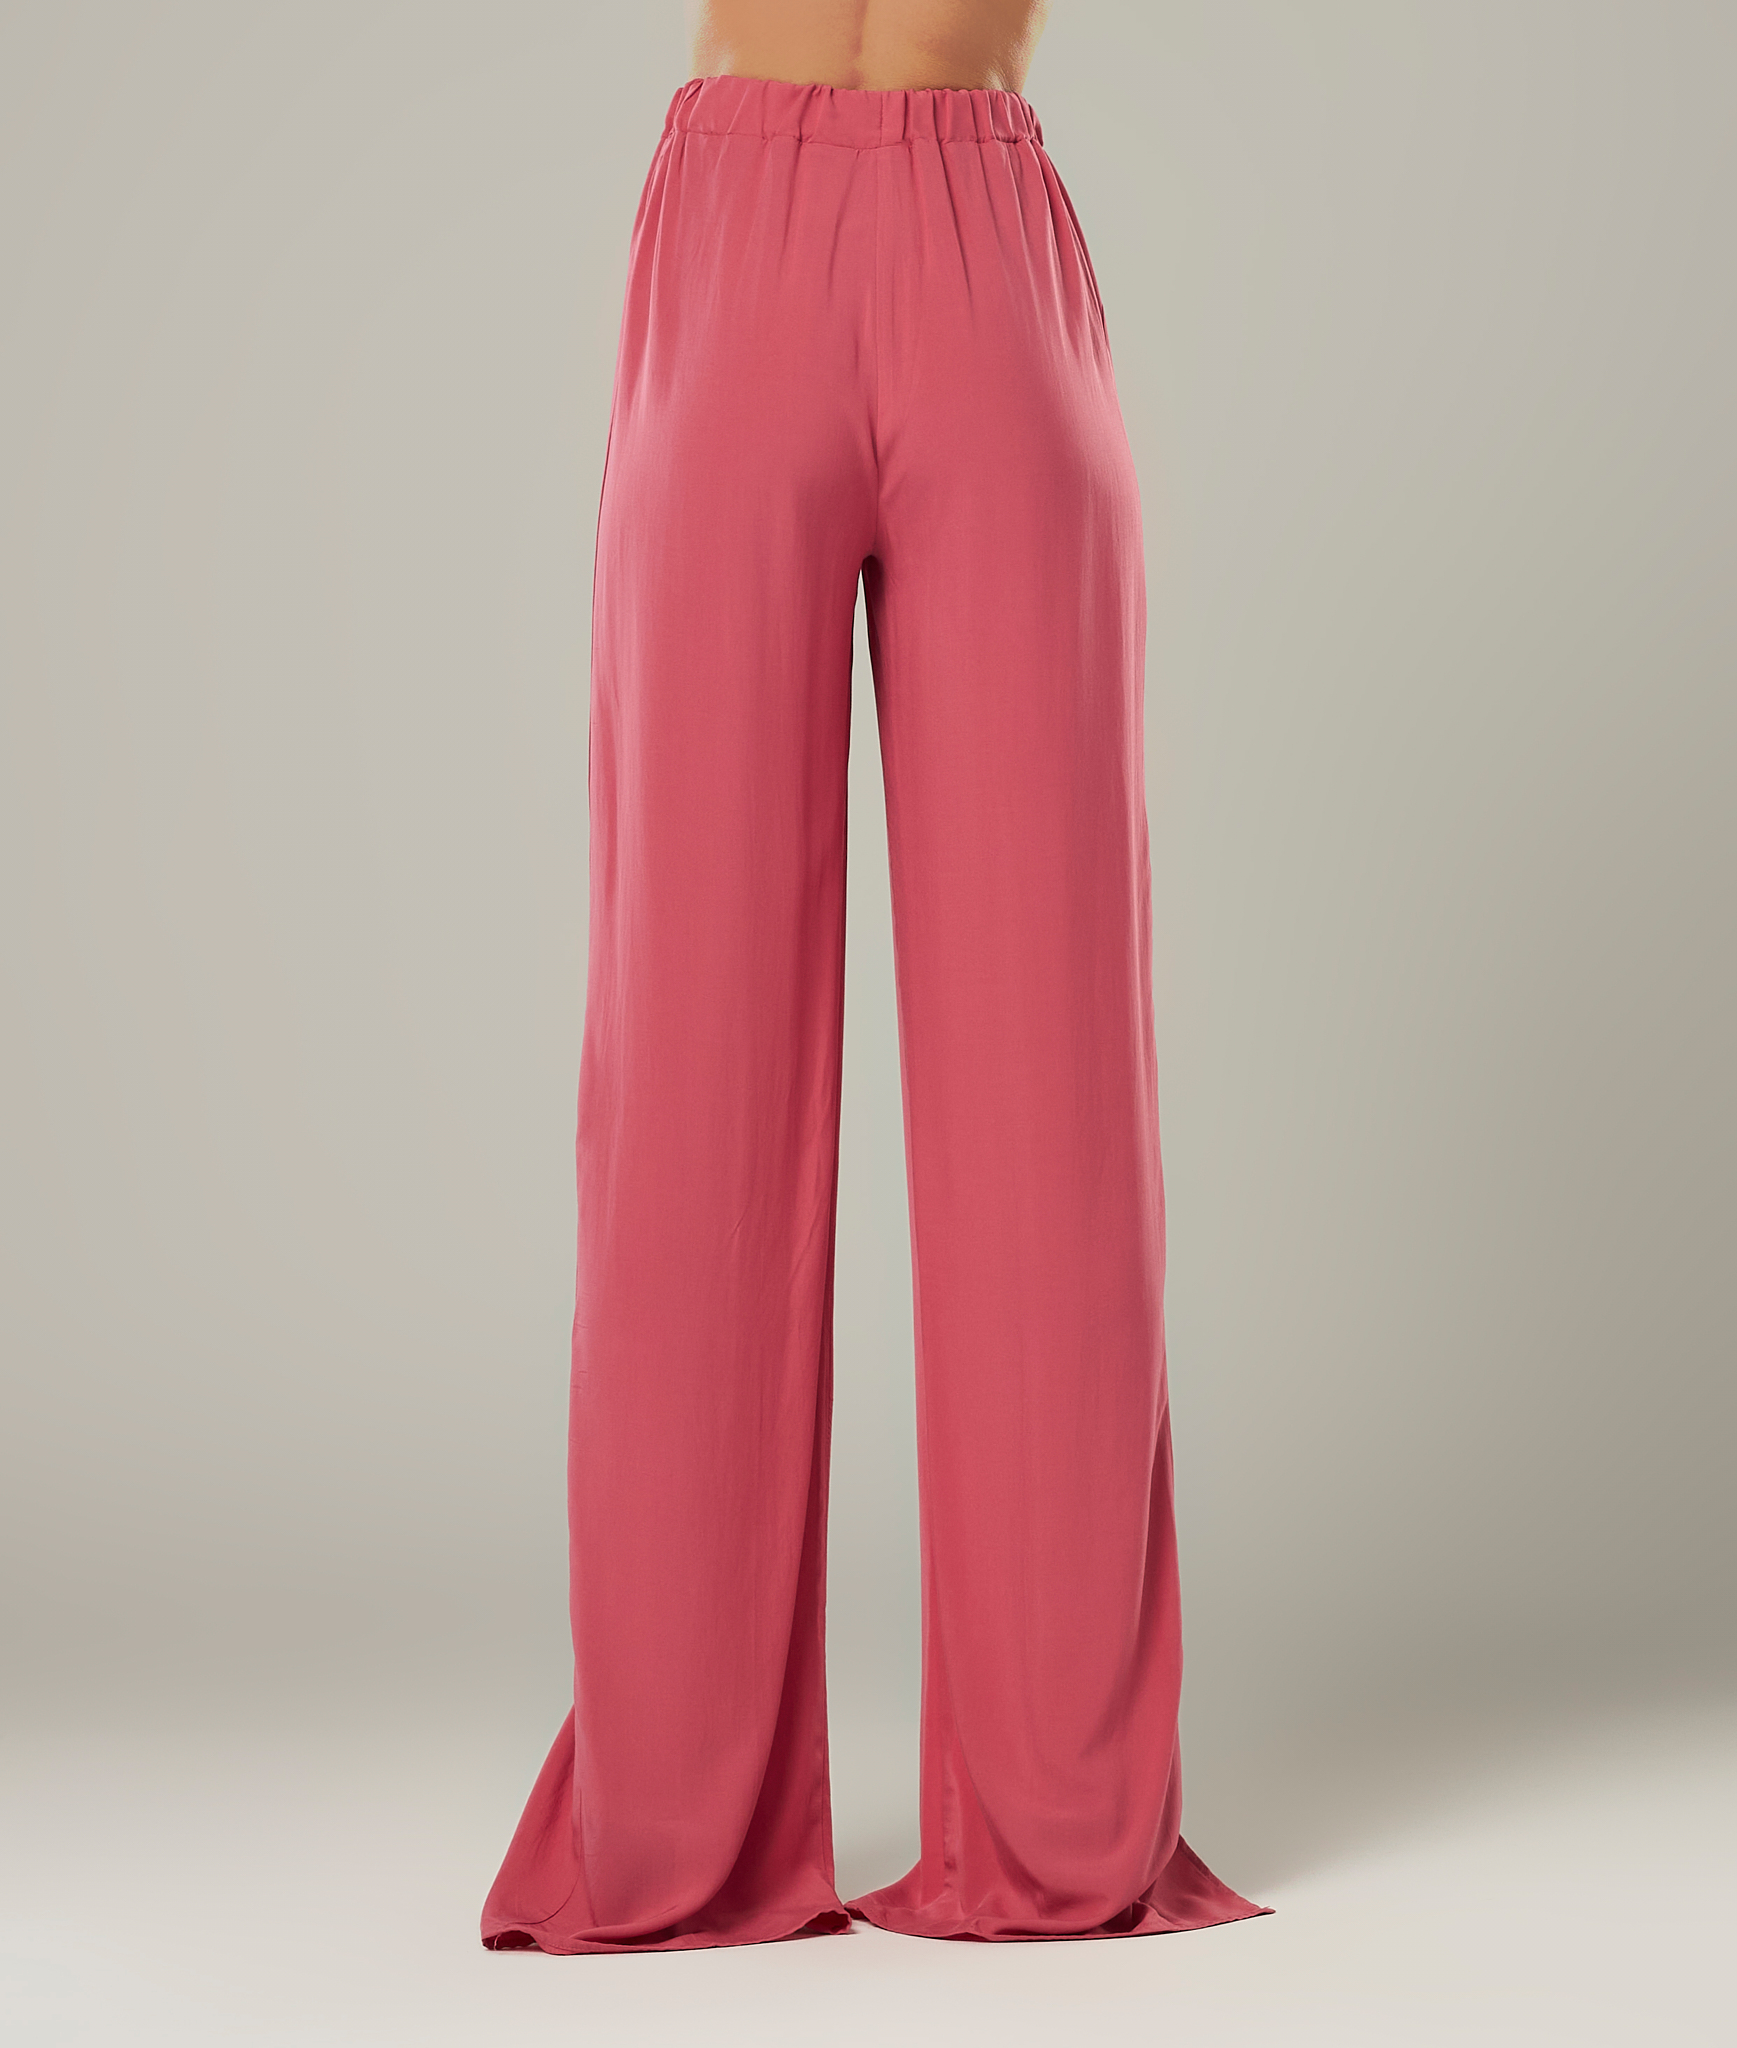 Gilda Dusty Pink Trousers